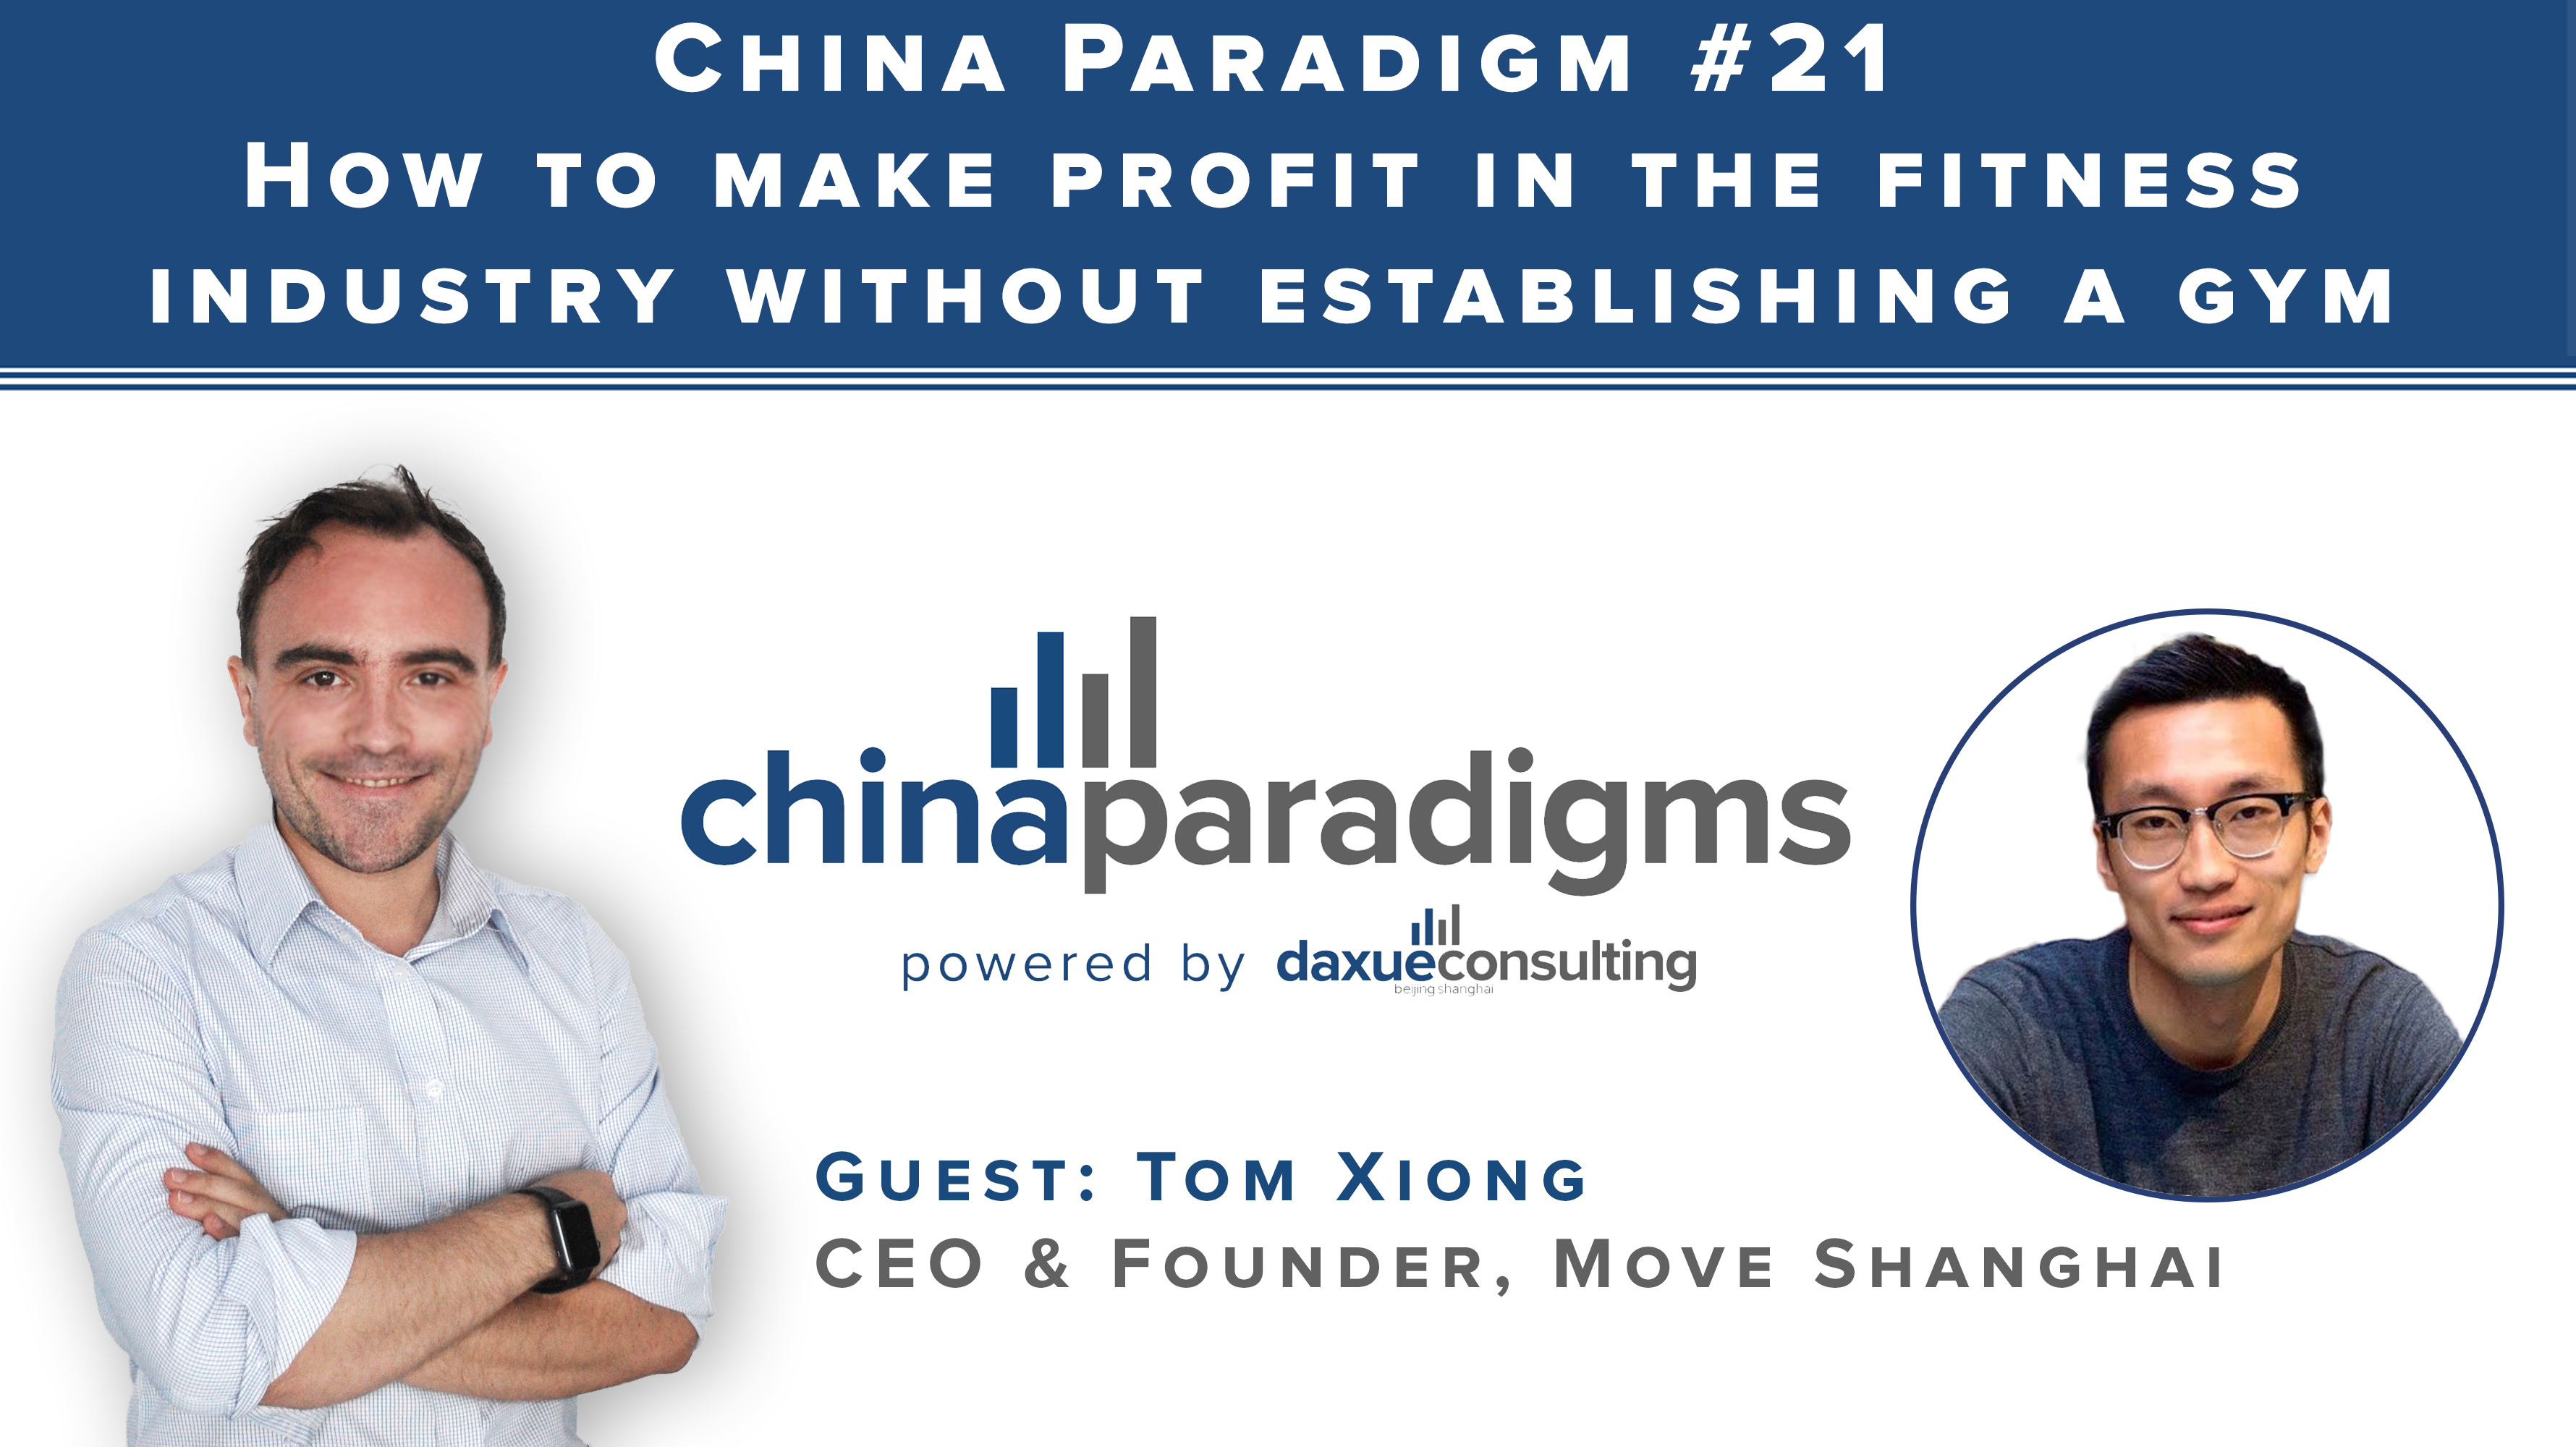 [Podcast] China paradigm #21: How to make profit in the fitness industry without establishing a gym